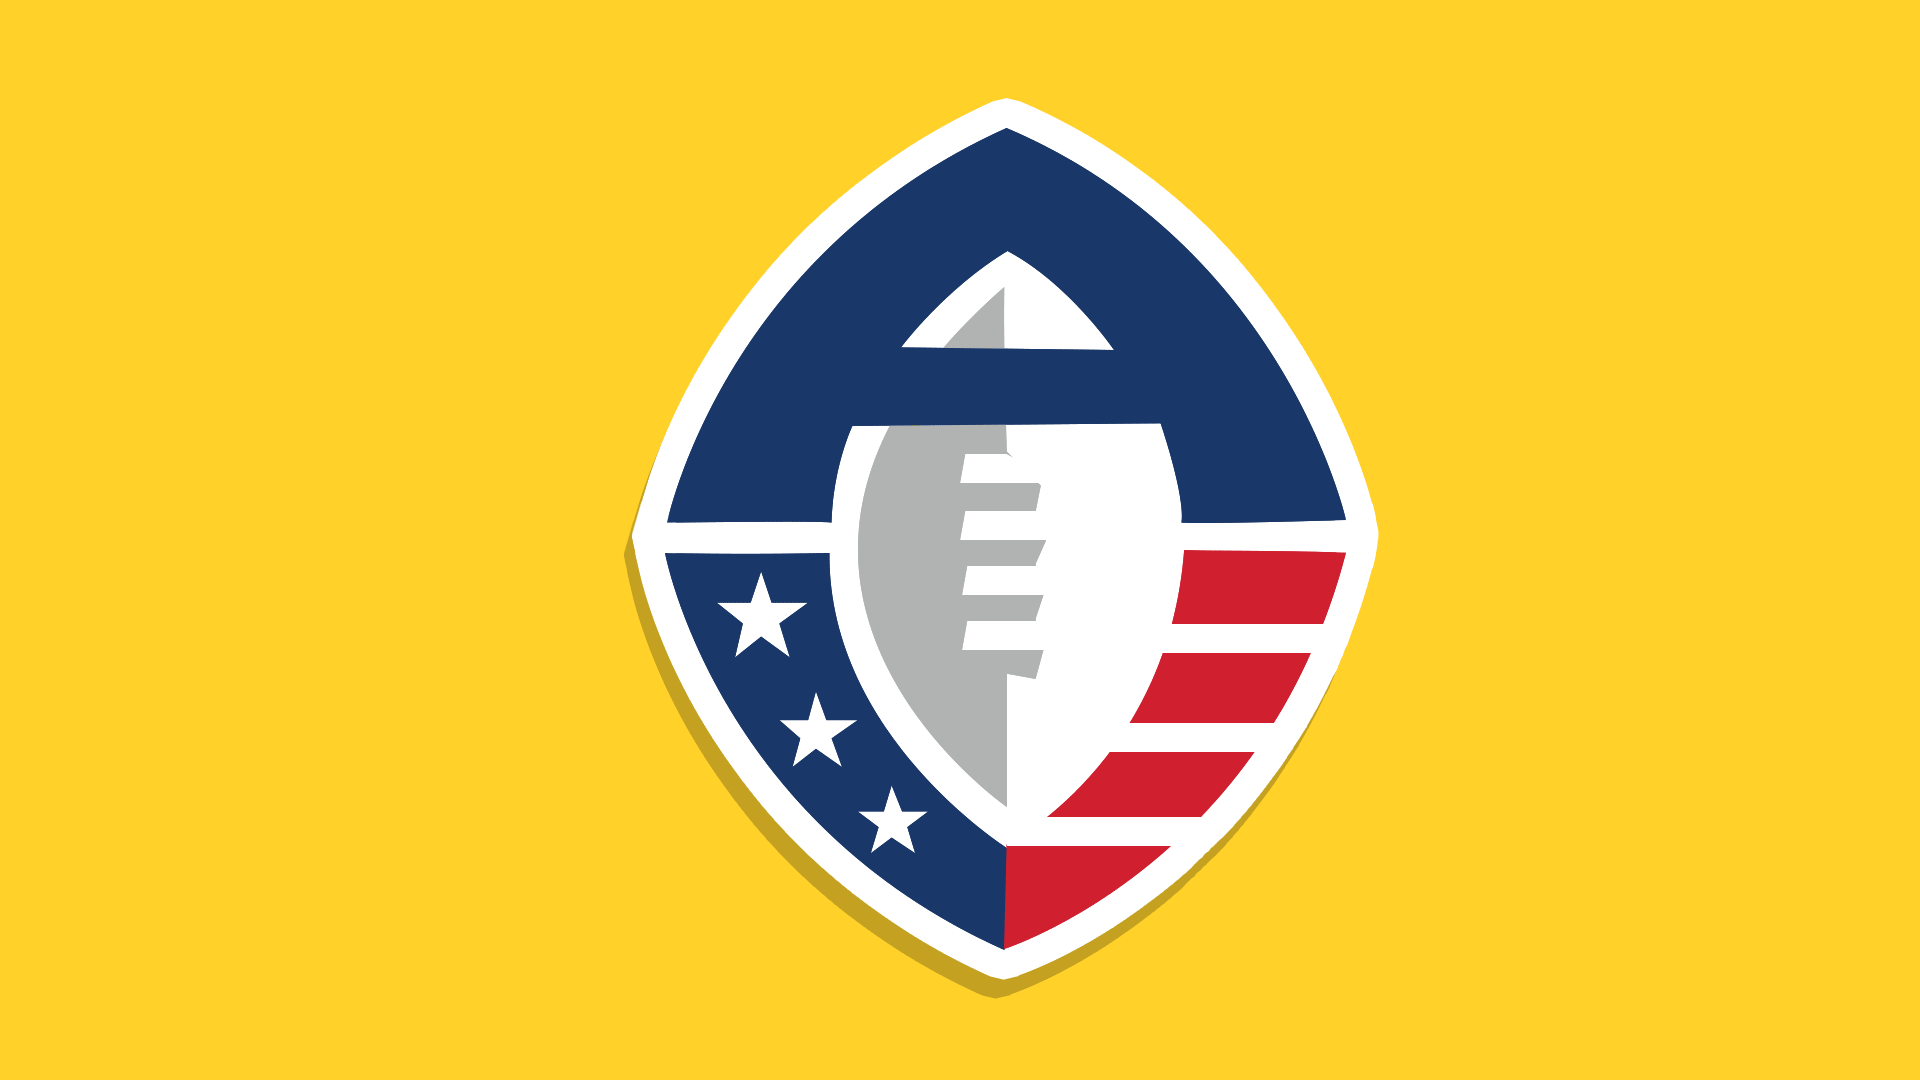 Illustration of AAF logo breaking into pieces